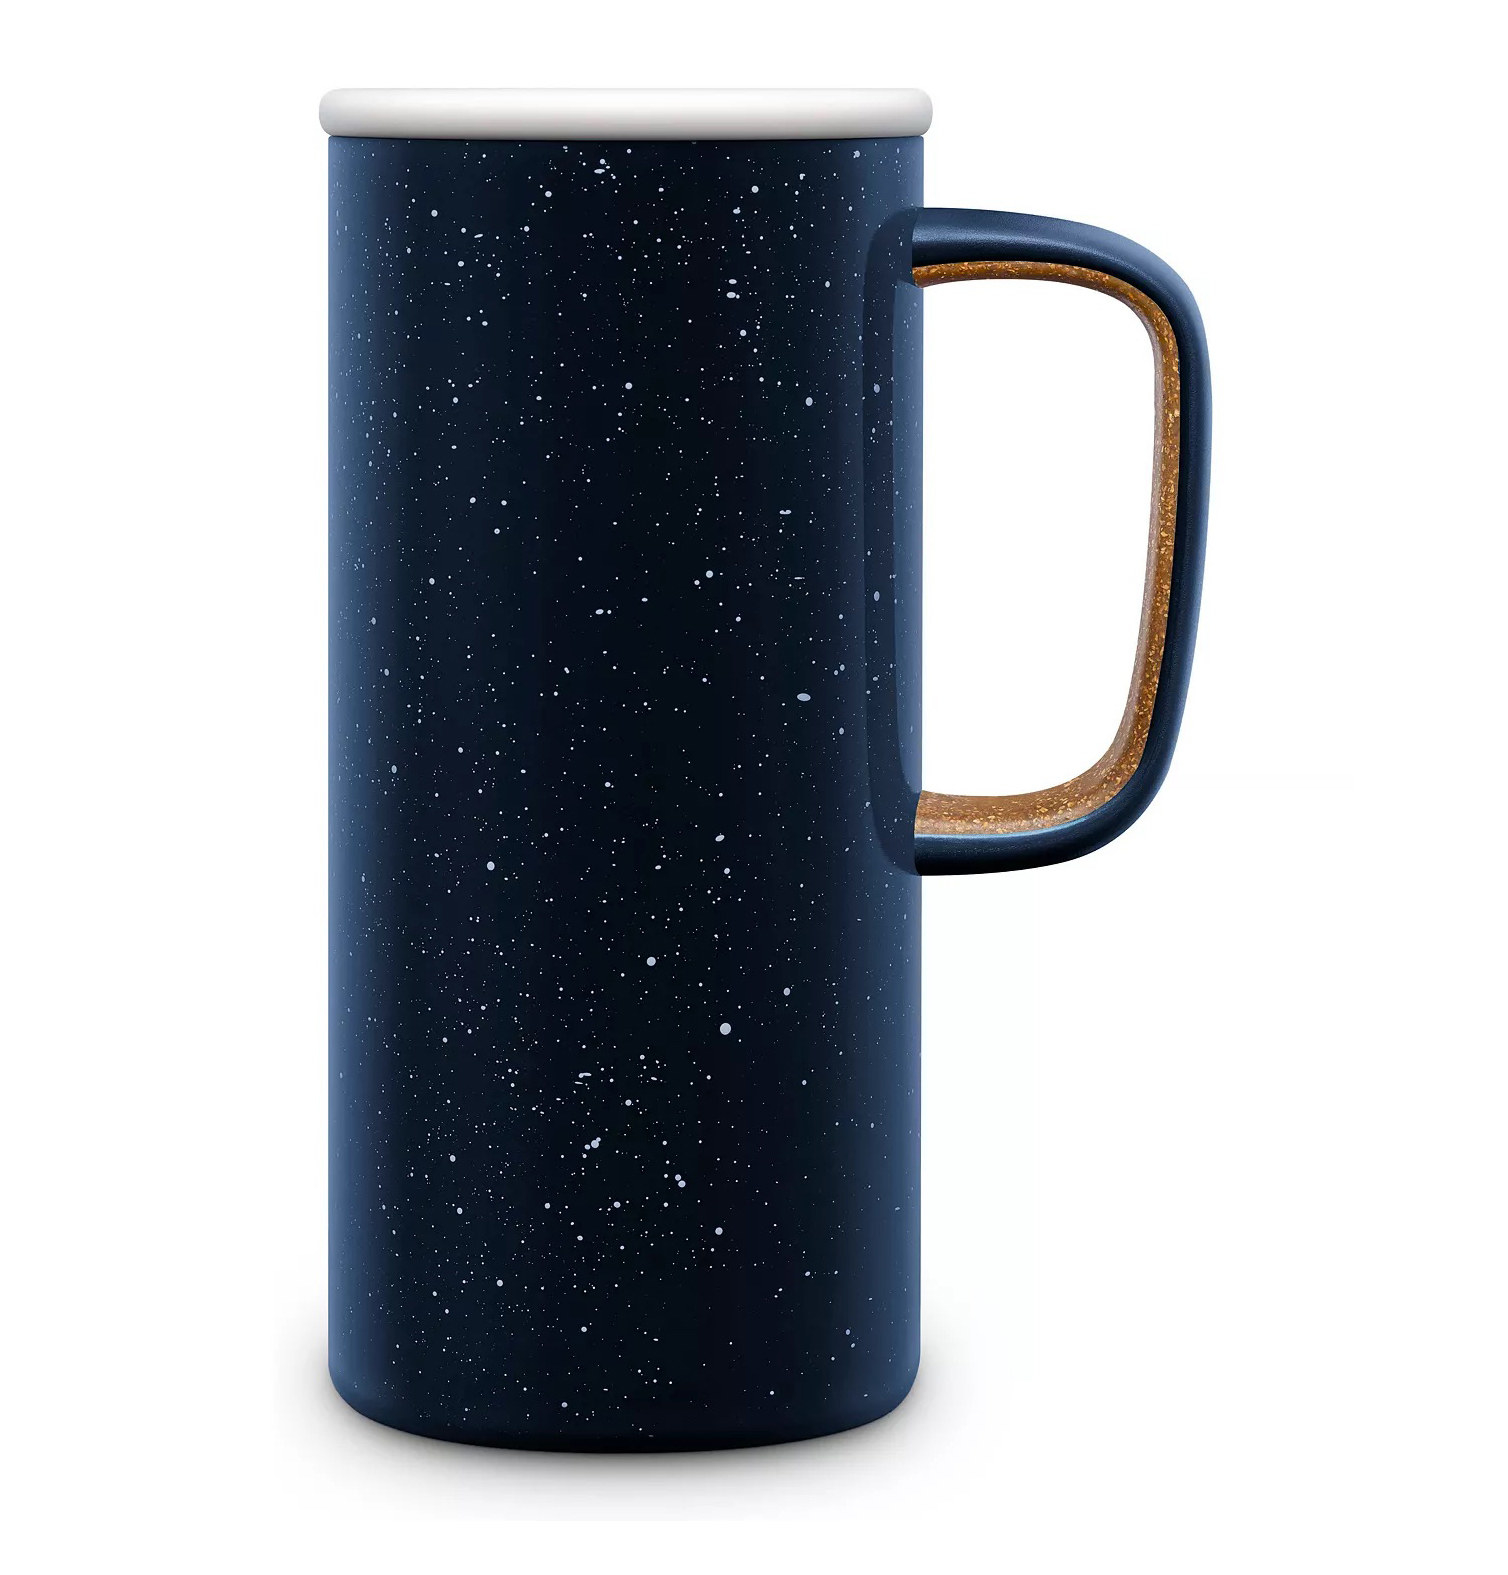 A tall, navy speckled mug with a white lid and cork detailing on the handle